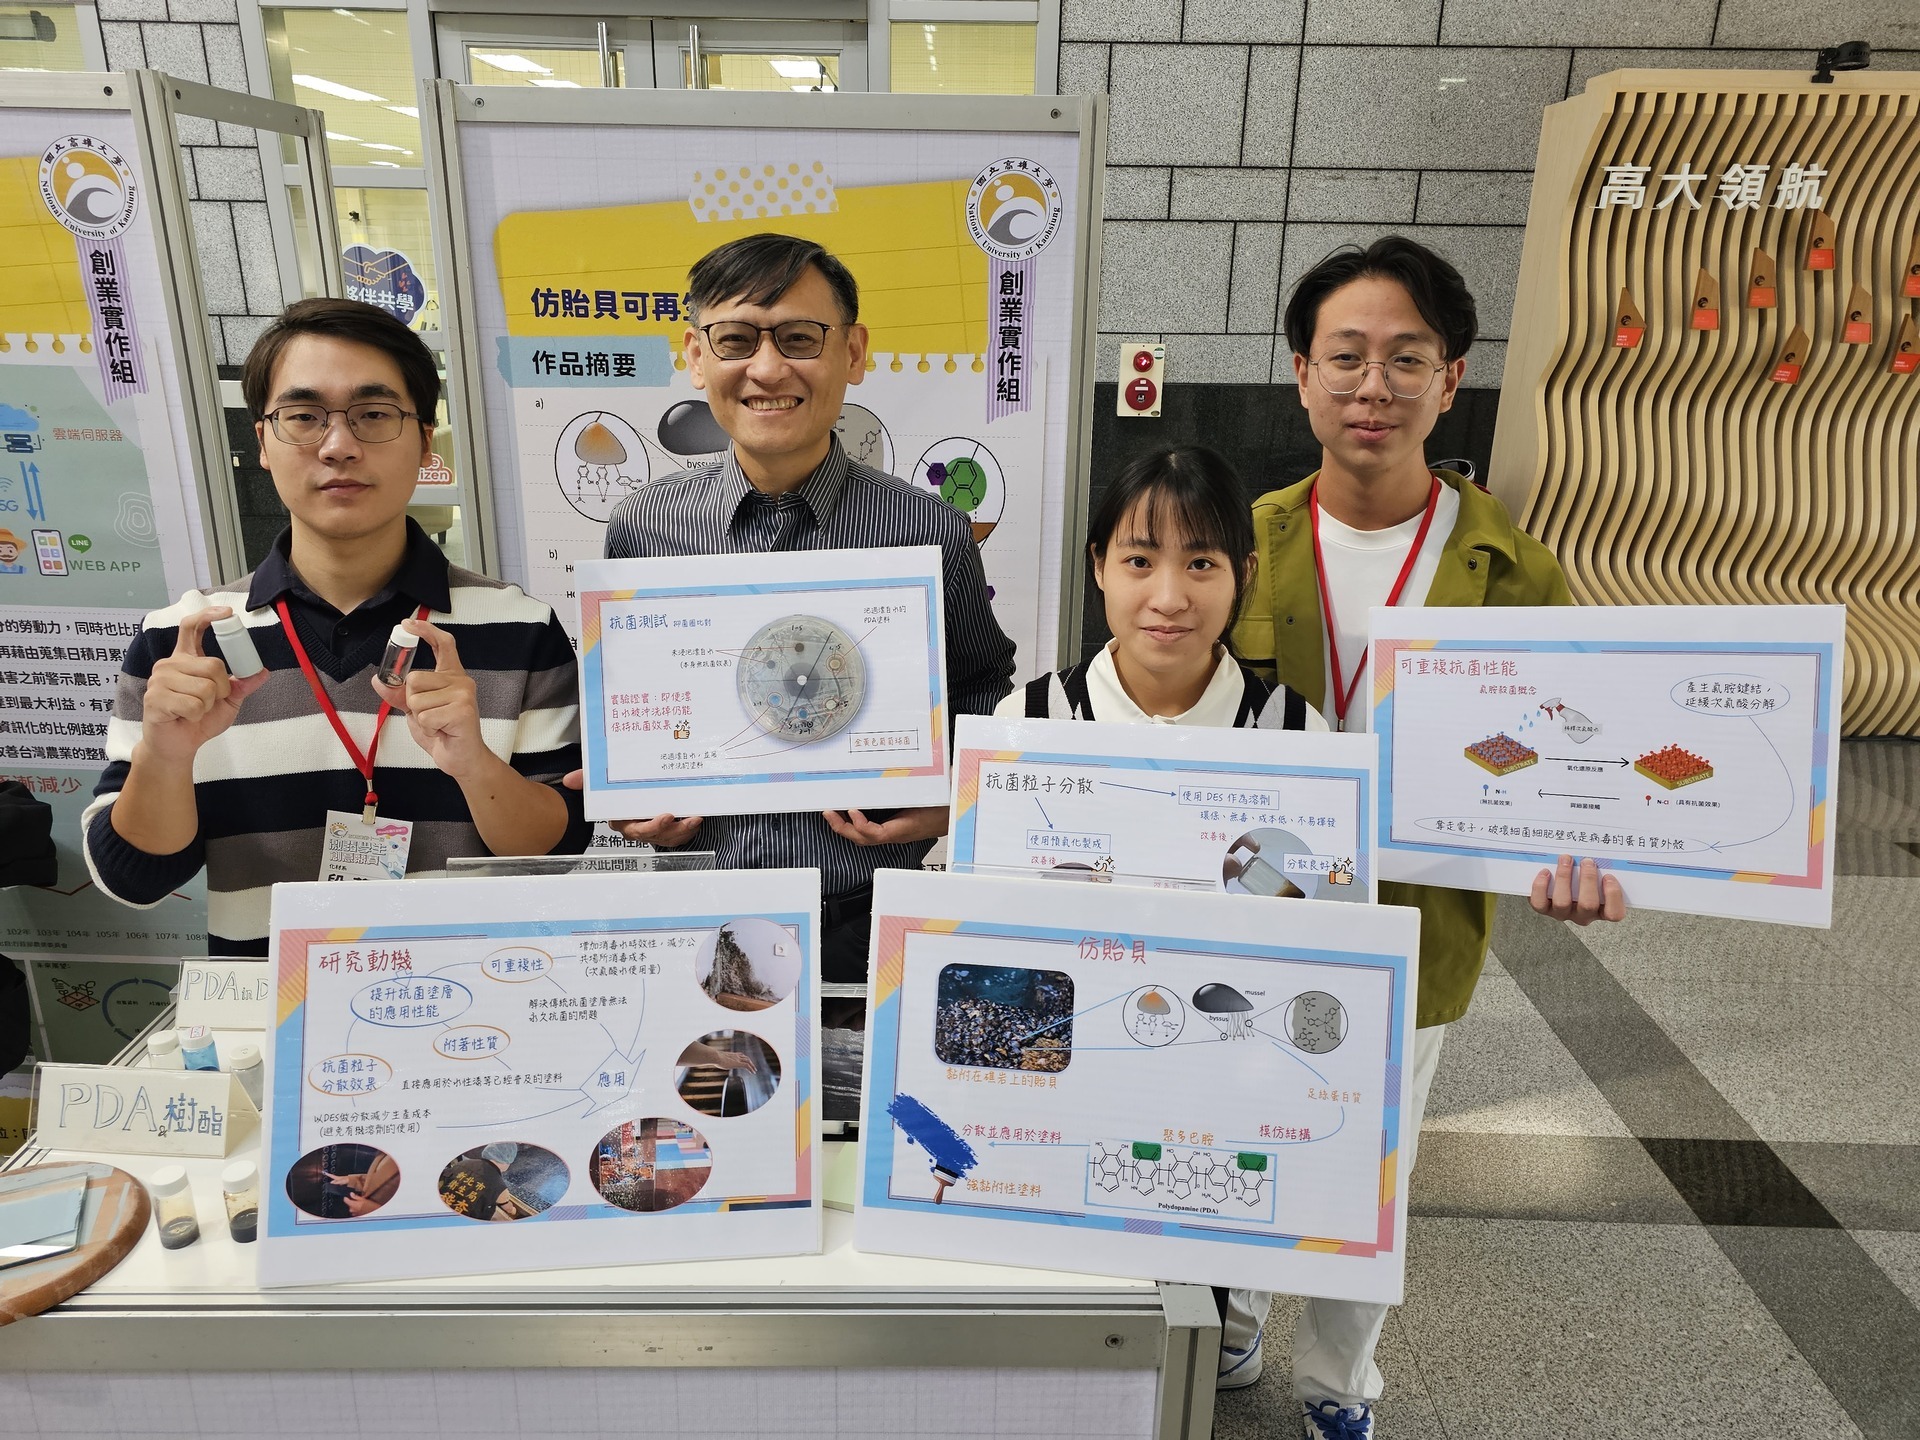 NUK's Department of Chemical and Materials Engineering, under the guidance of Distinguished Professor Yi-Chang Chung, guided three undergraduate students, Duan Huawen, Chung Bingxun, and Chen Xianglin, in developing "Mussel-inspired renewable antibacterial coating." 006